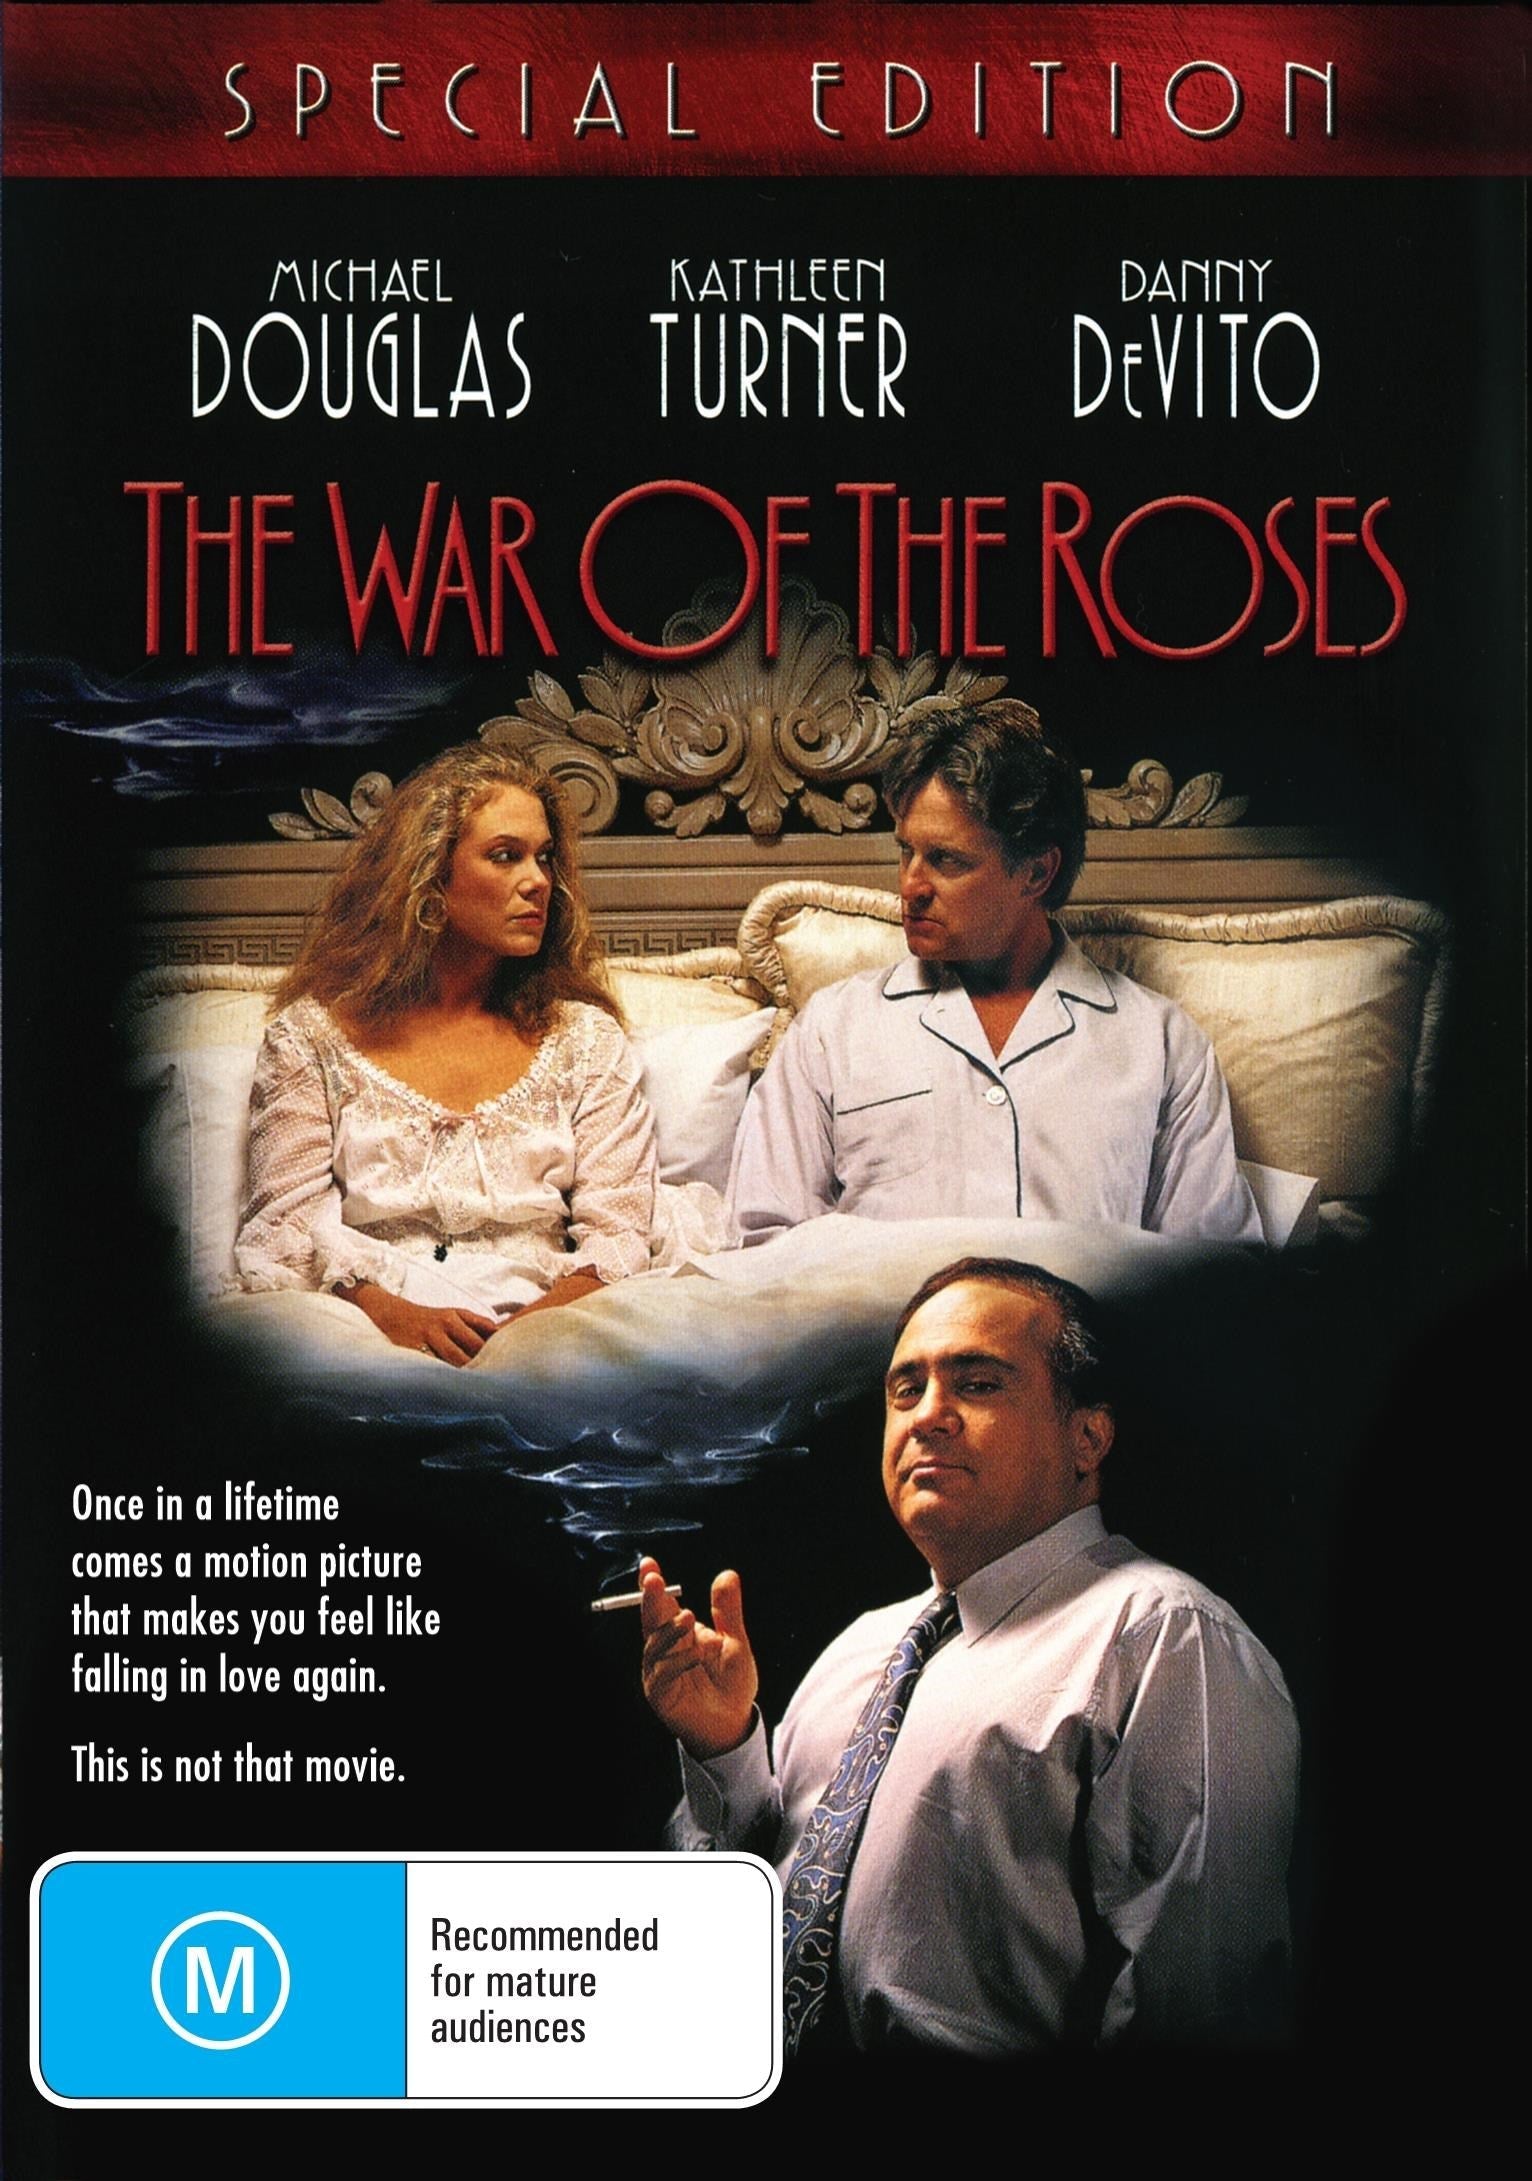 The War of the Roses rareandcollectibledvds